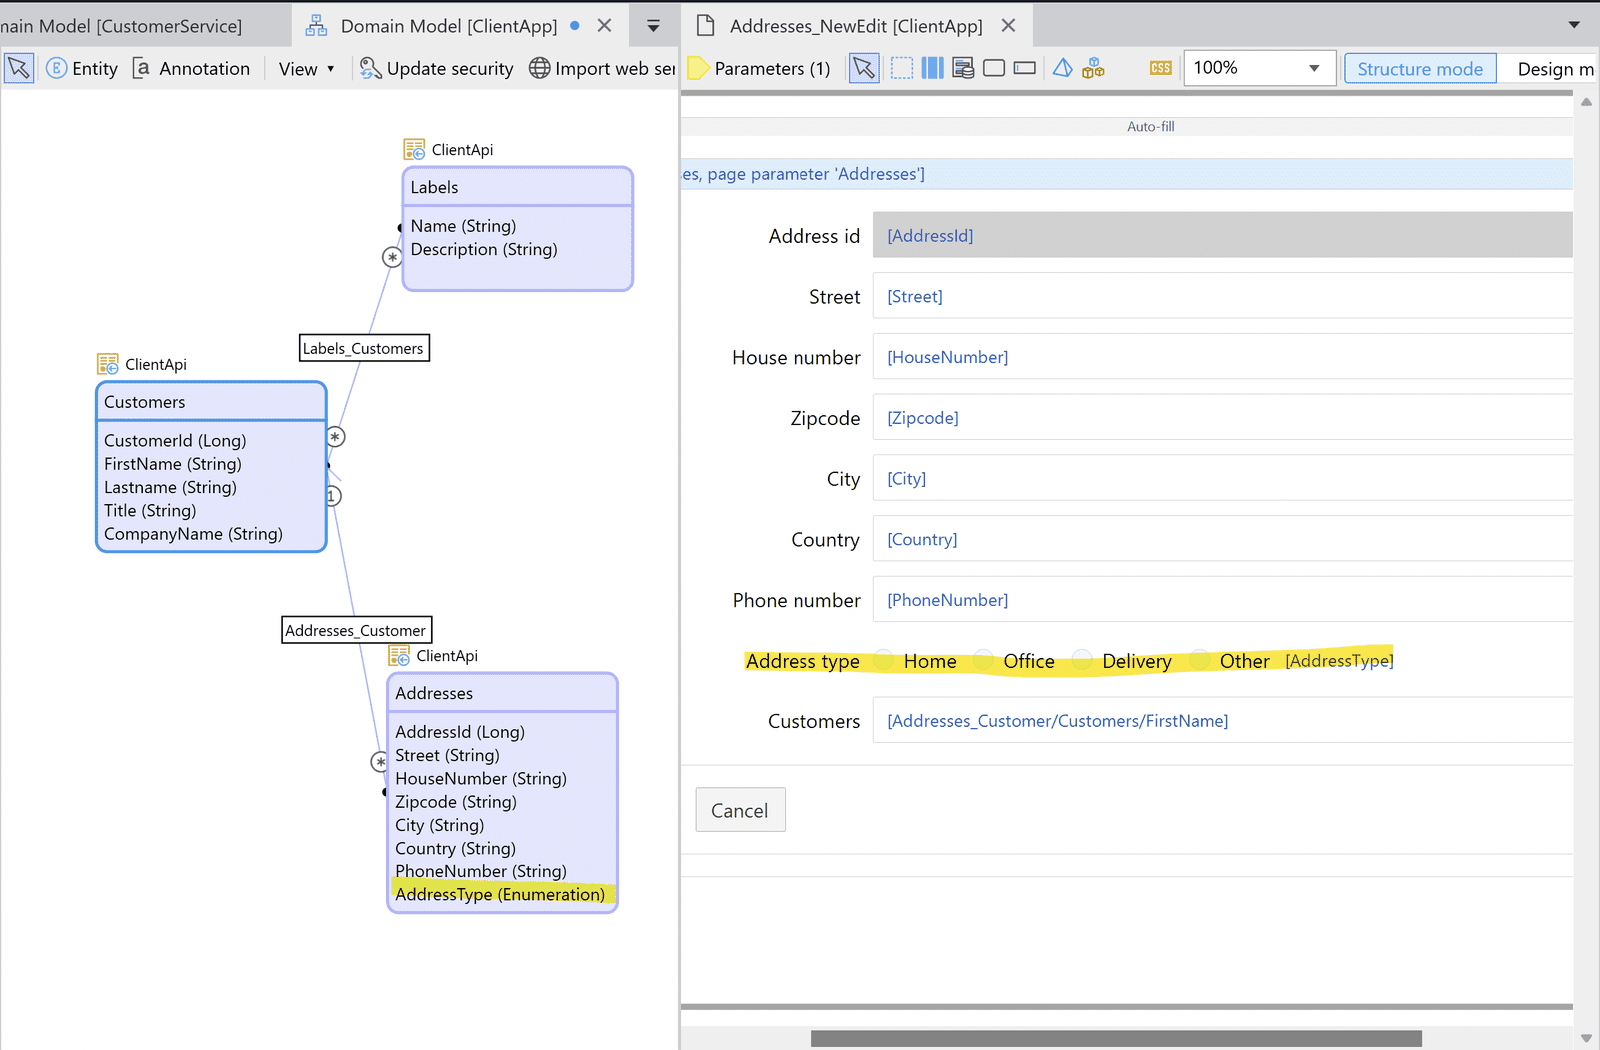 Image showing a form with an enumeration attribute and how it shows up in the application